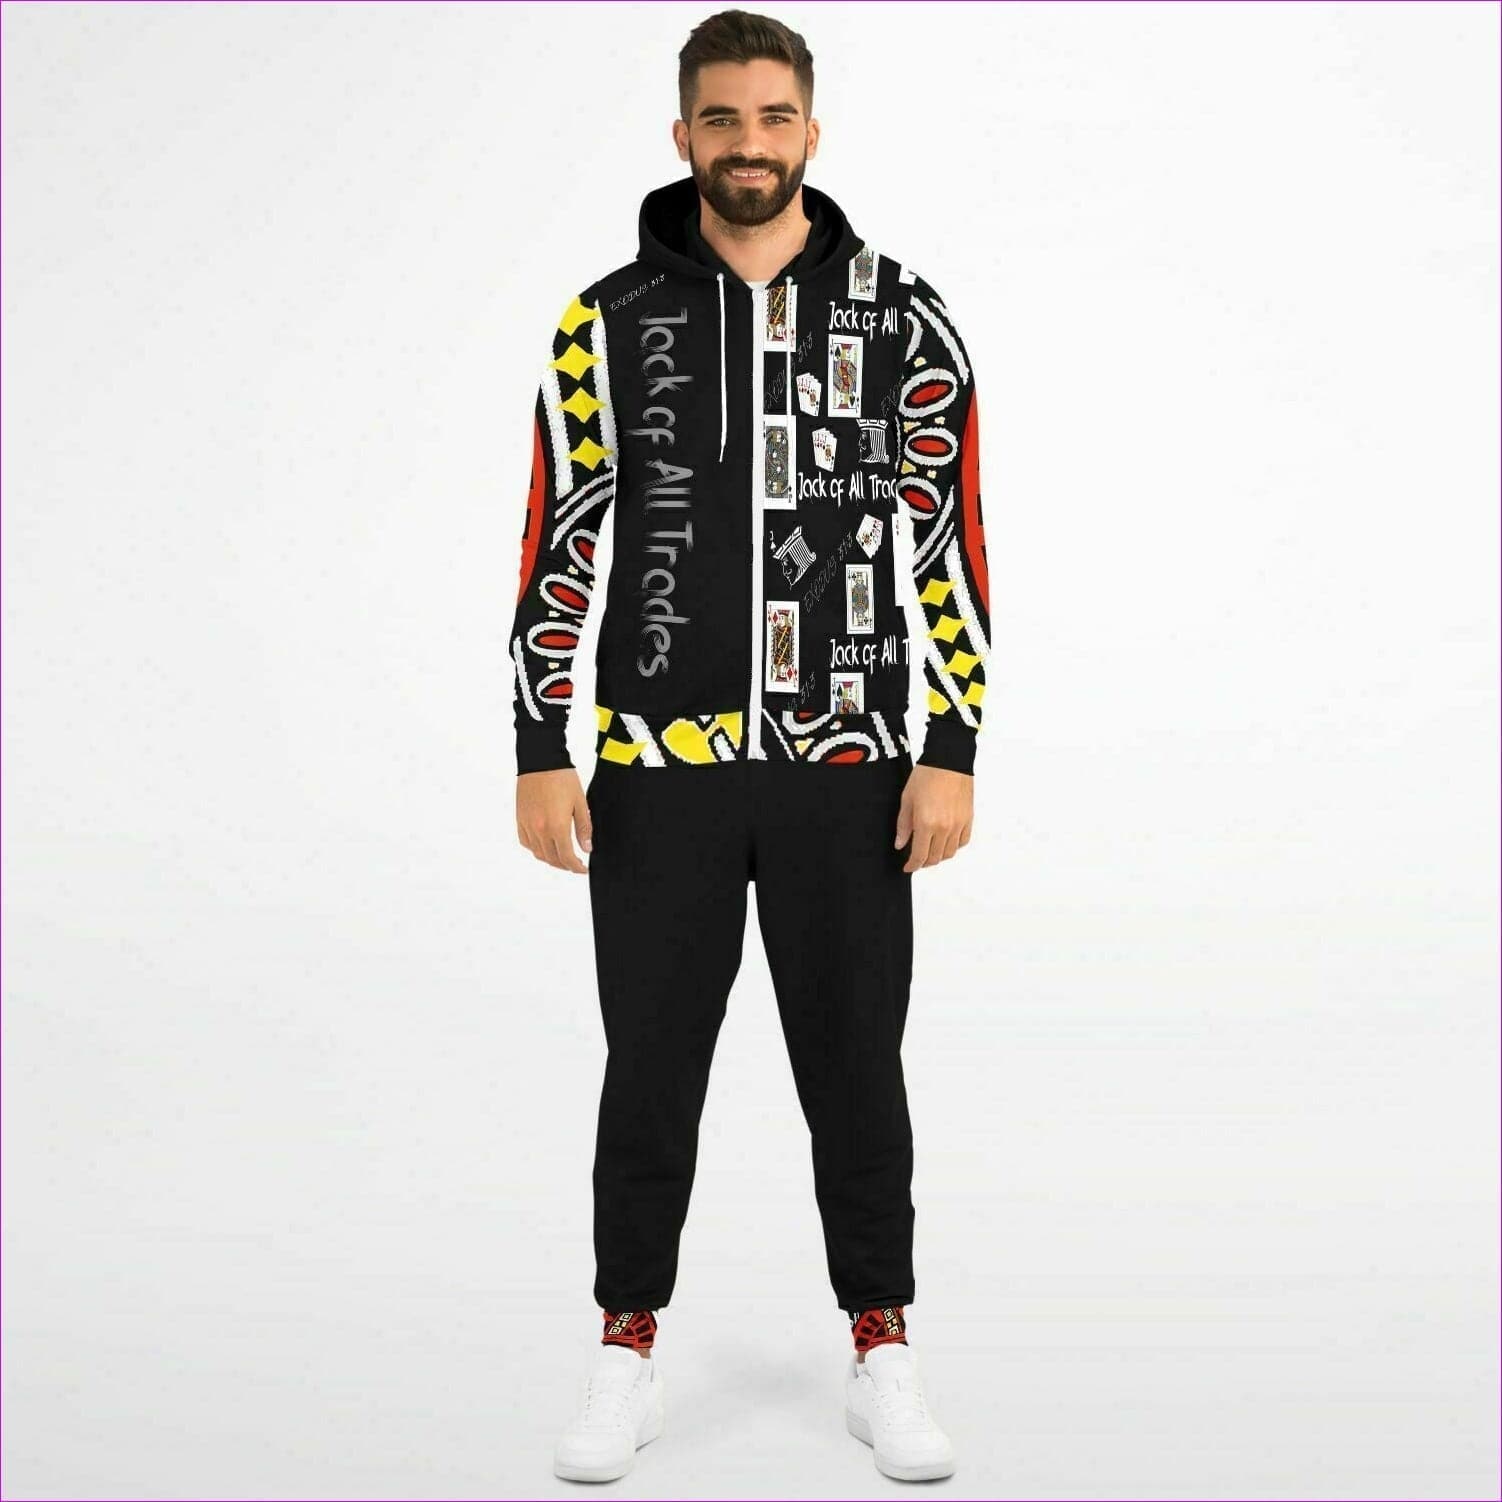 - Jack Of All Trades Men's Jogging Suit - Fashion Ziphoodie & Jogger - AOP at TFC&H Co.